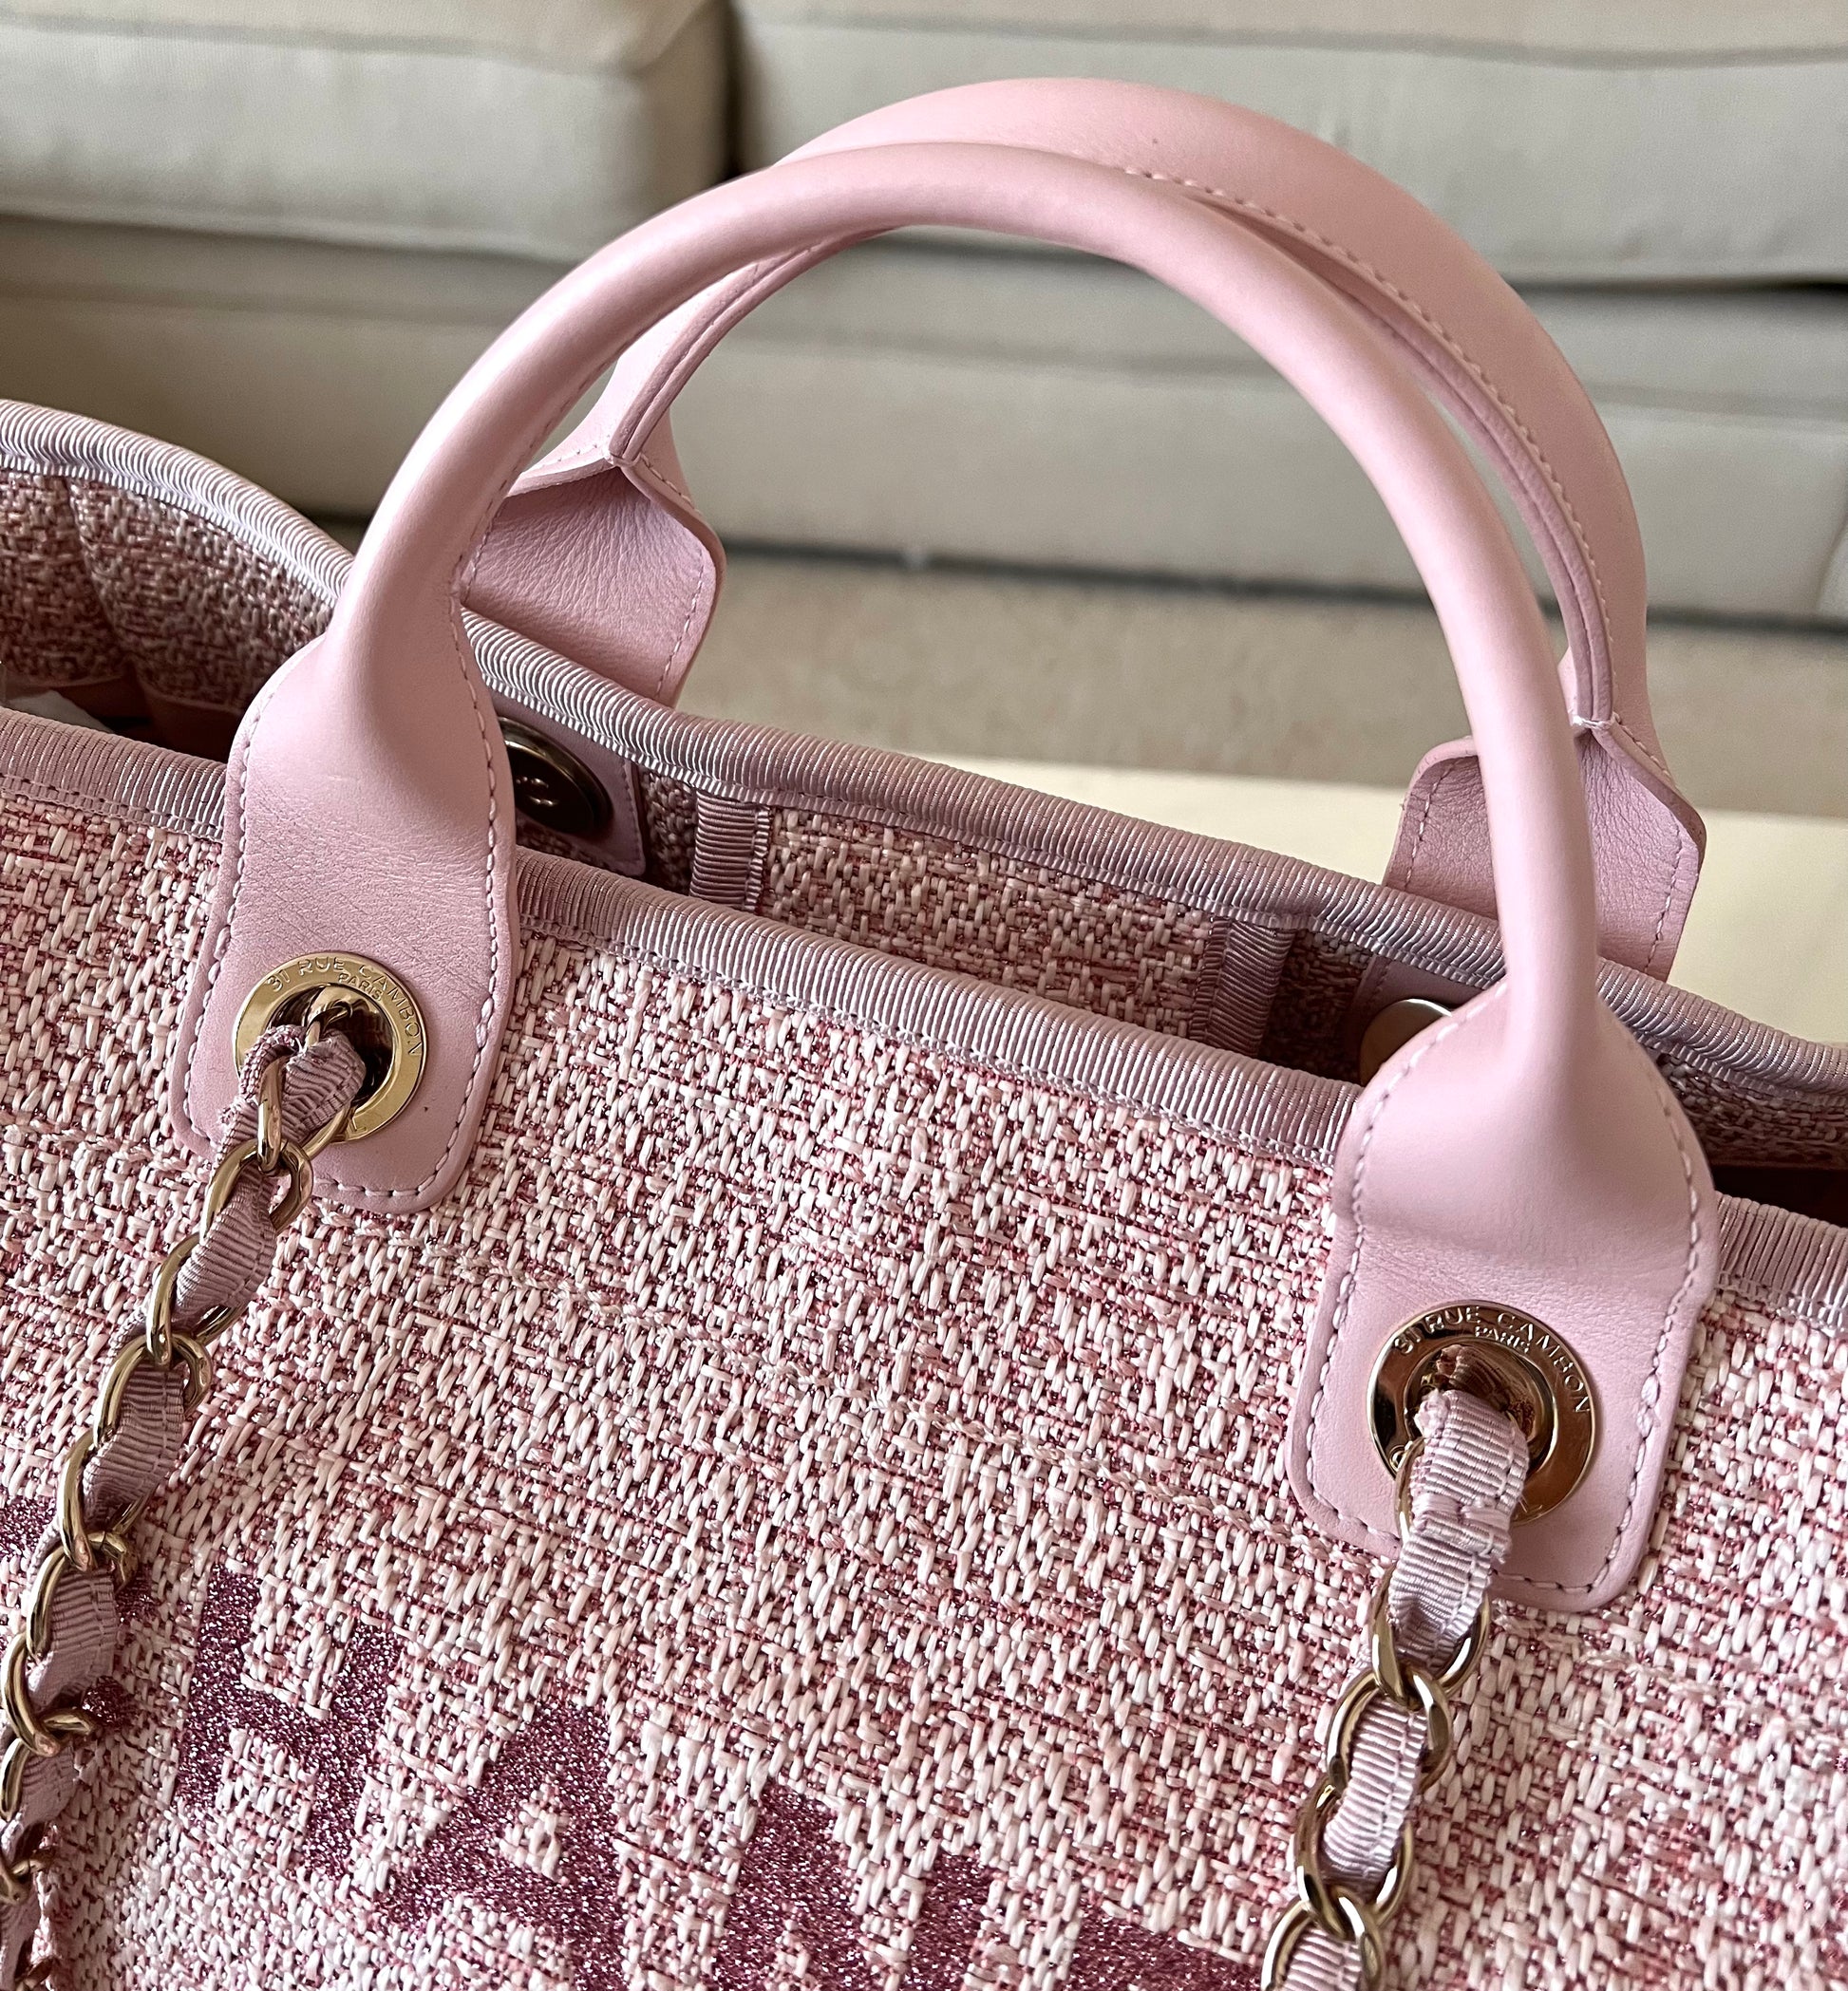 Chanel Pink Leather Medium Deauville Tote